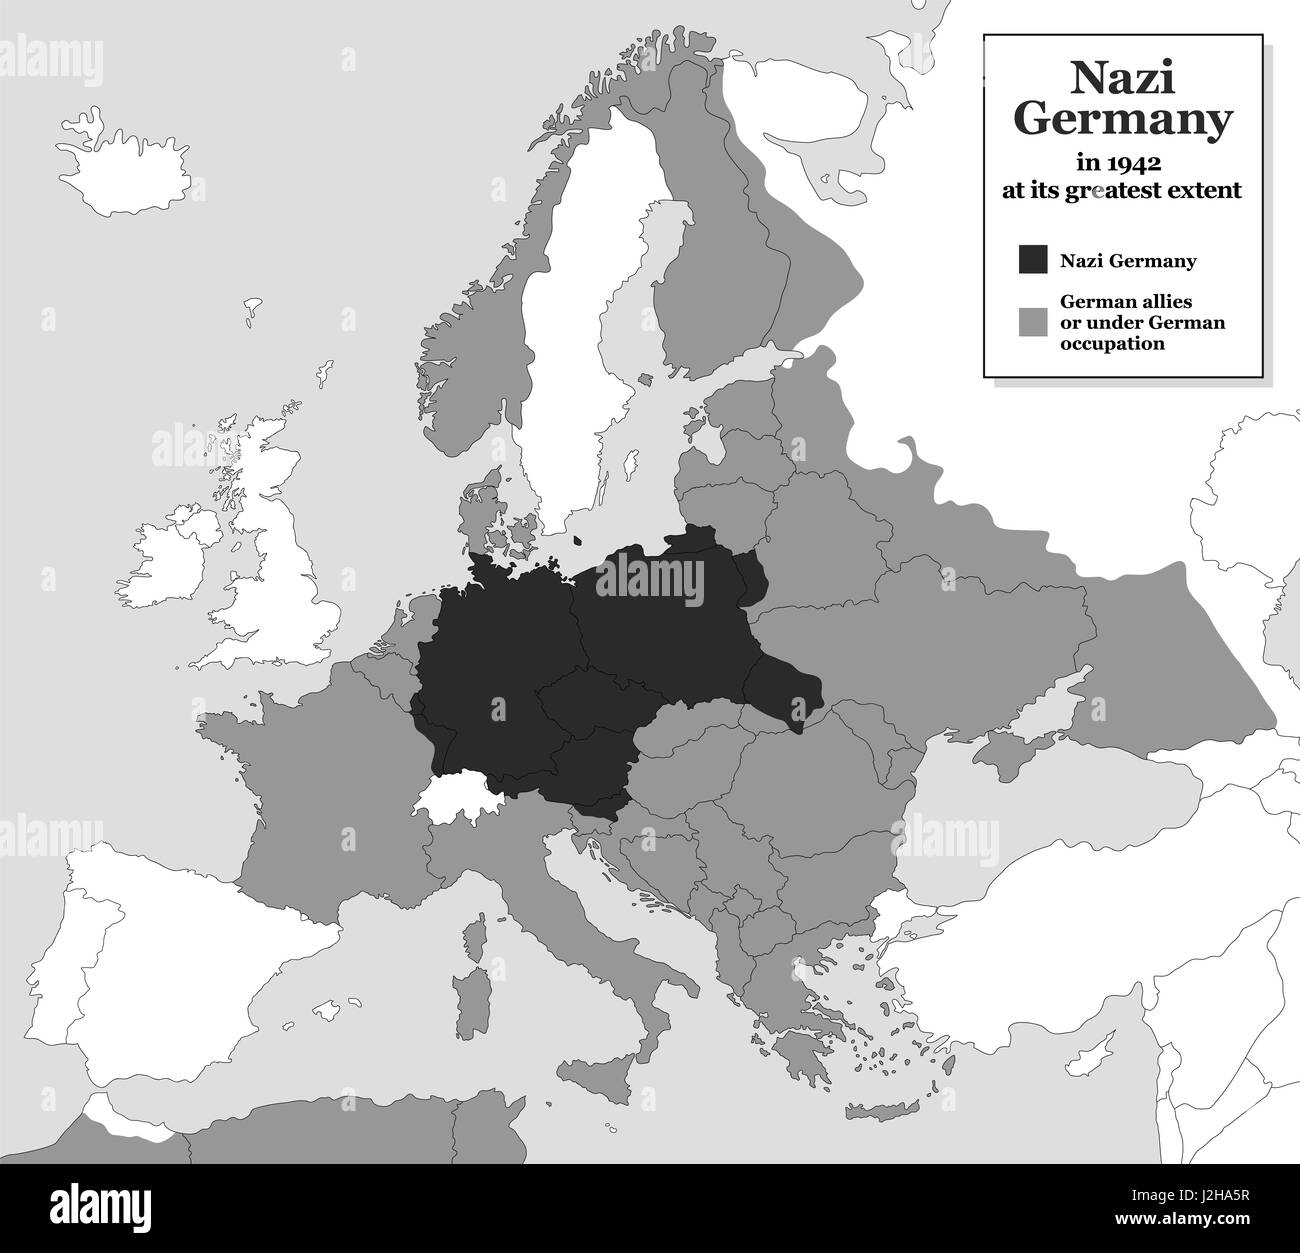 Nazi Germany at its greatest extent during WWII in 1942 - with german allies and states under german occupation. Historical black and white map. Stock Photo